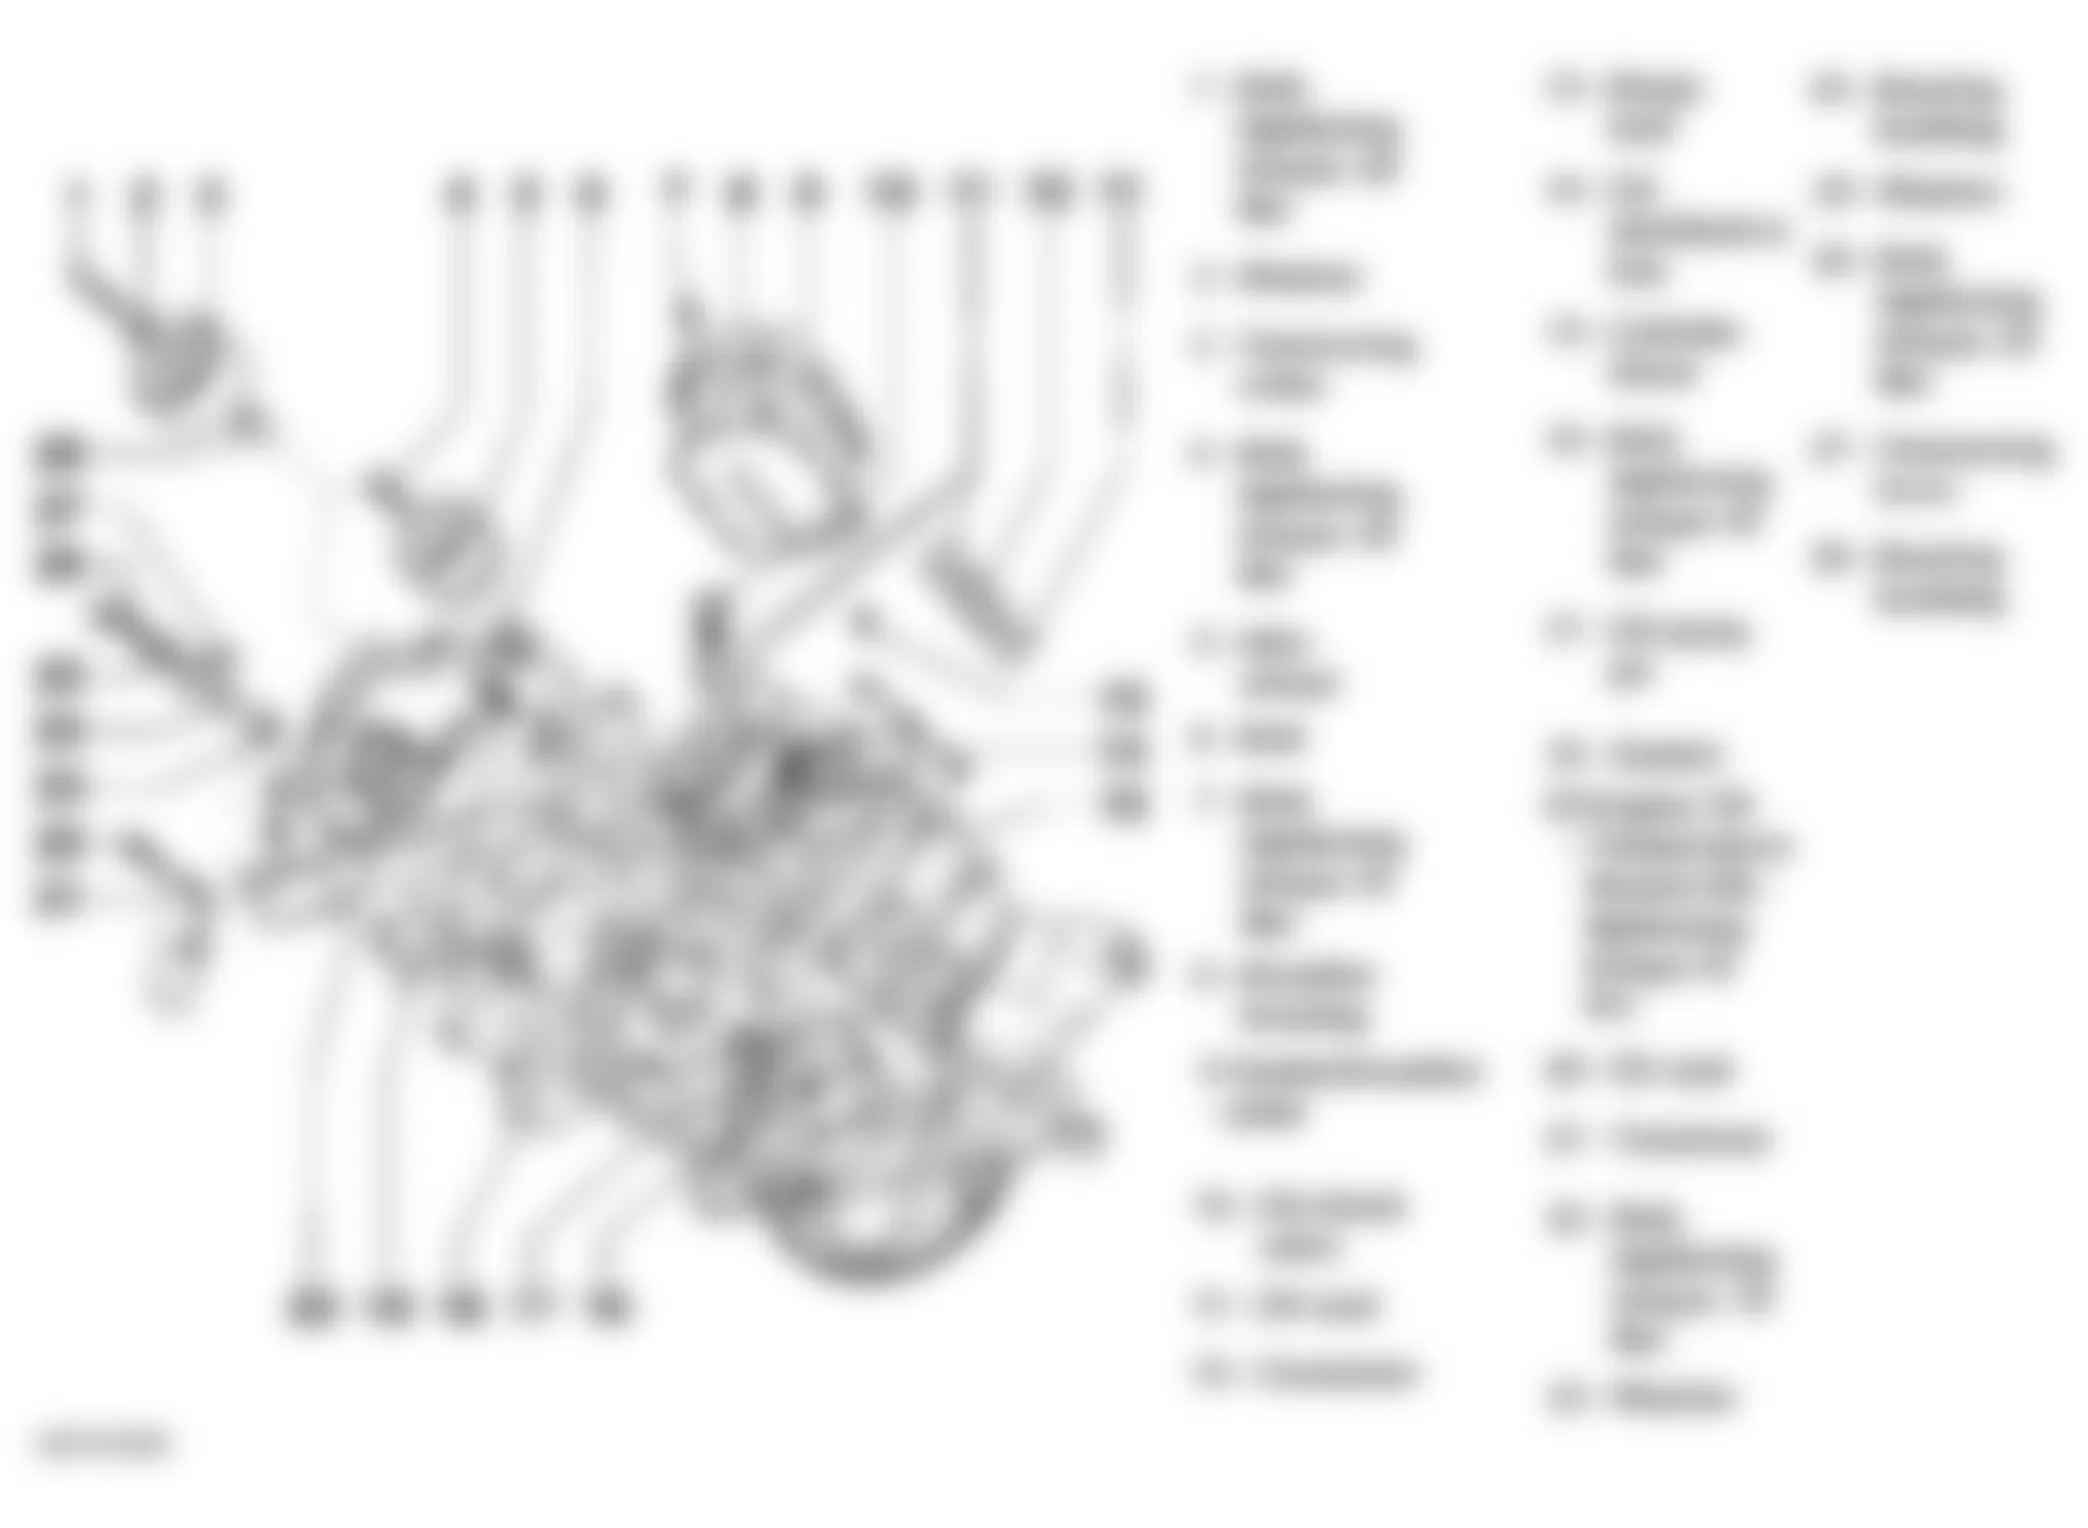 Audi allroad Quattro 2005 - Component Locations -  Exploded View Of Engine Lubrication System